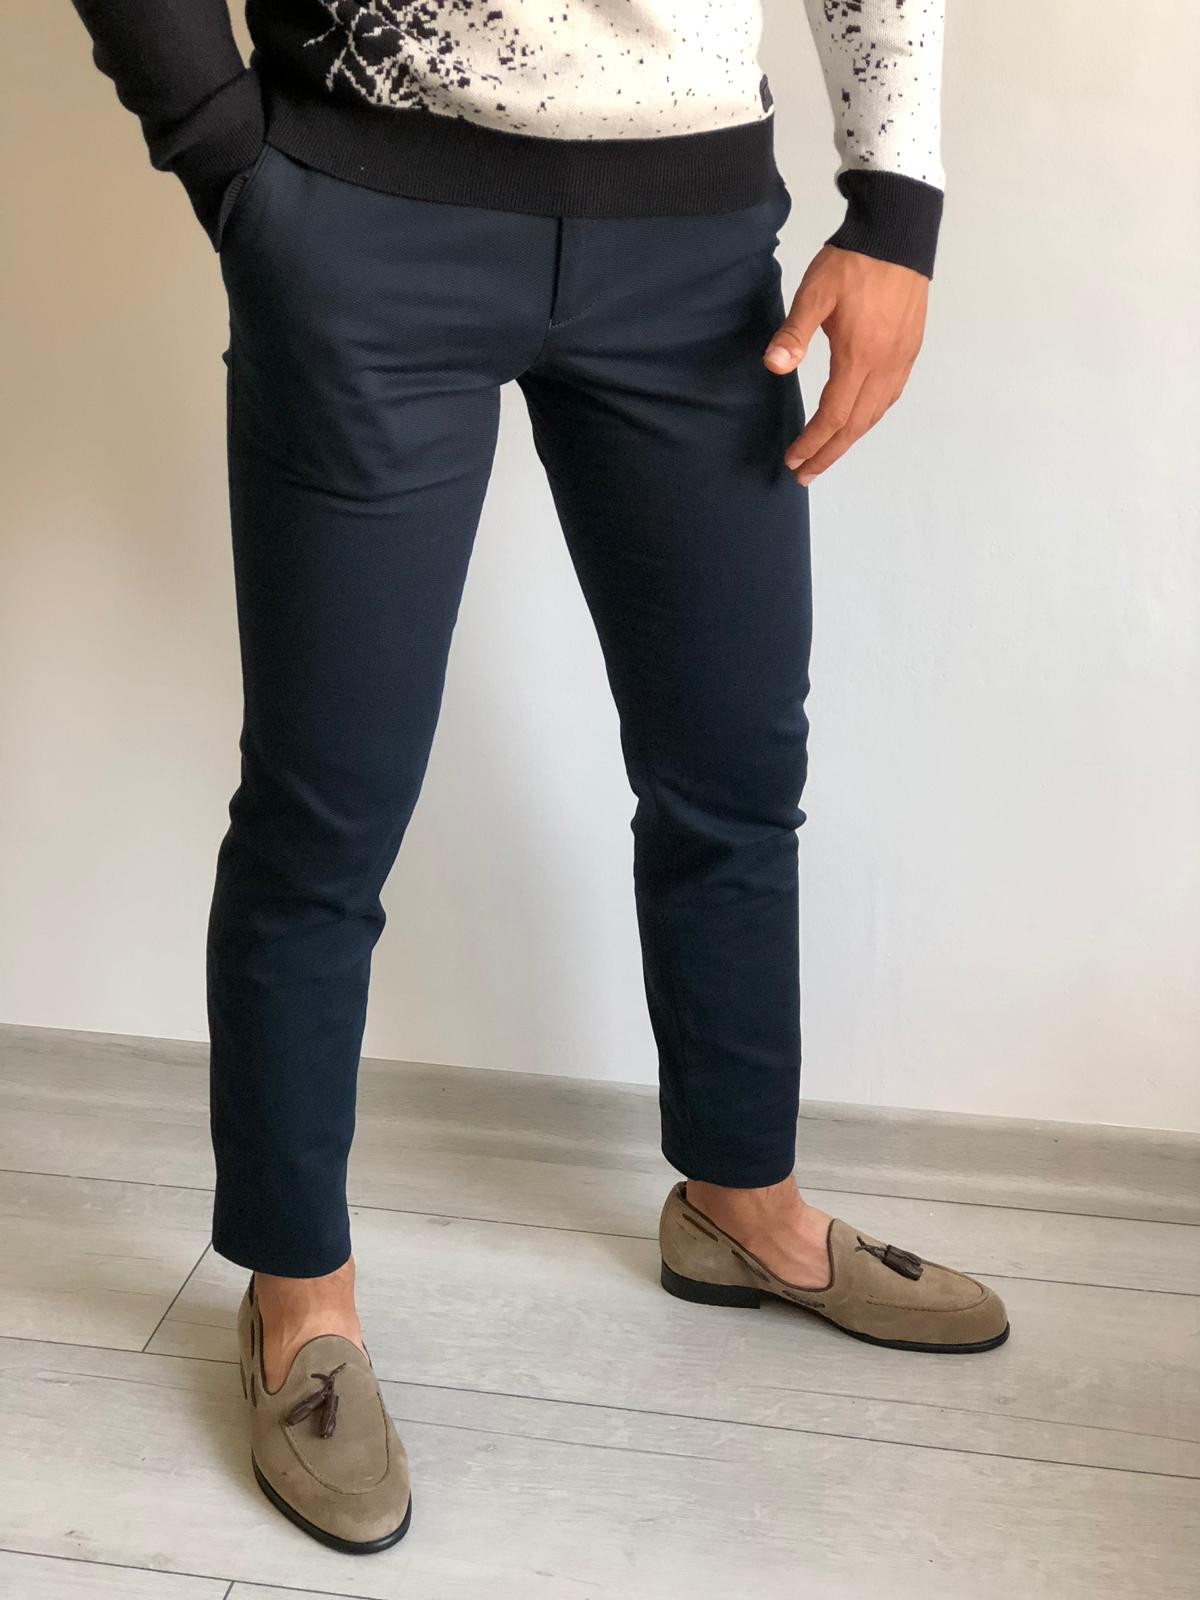 Buy Navy Blue Slim Fit Cotton Pants by Gentwith.com with Free Shipping